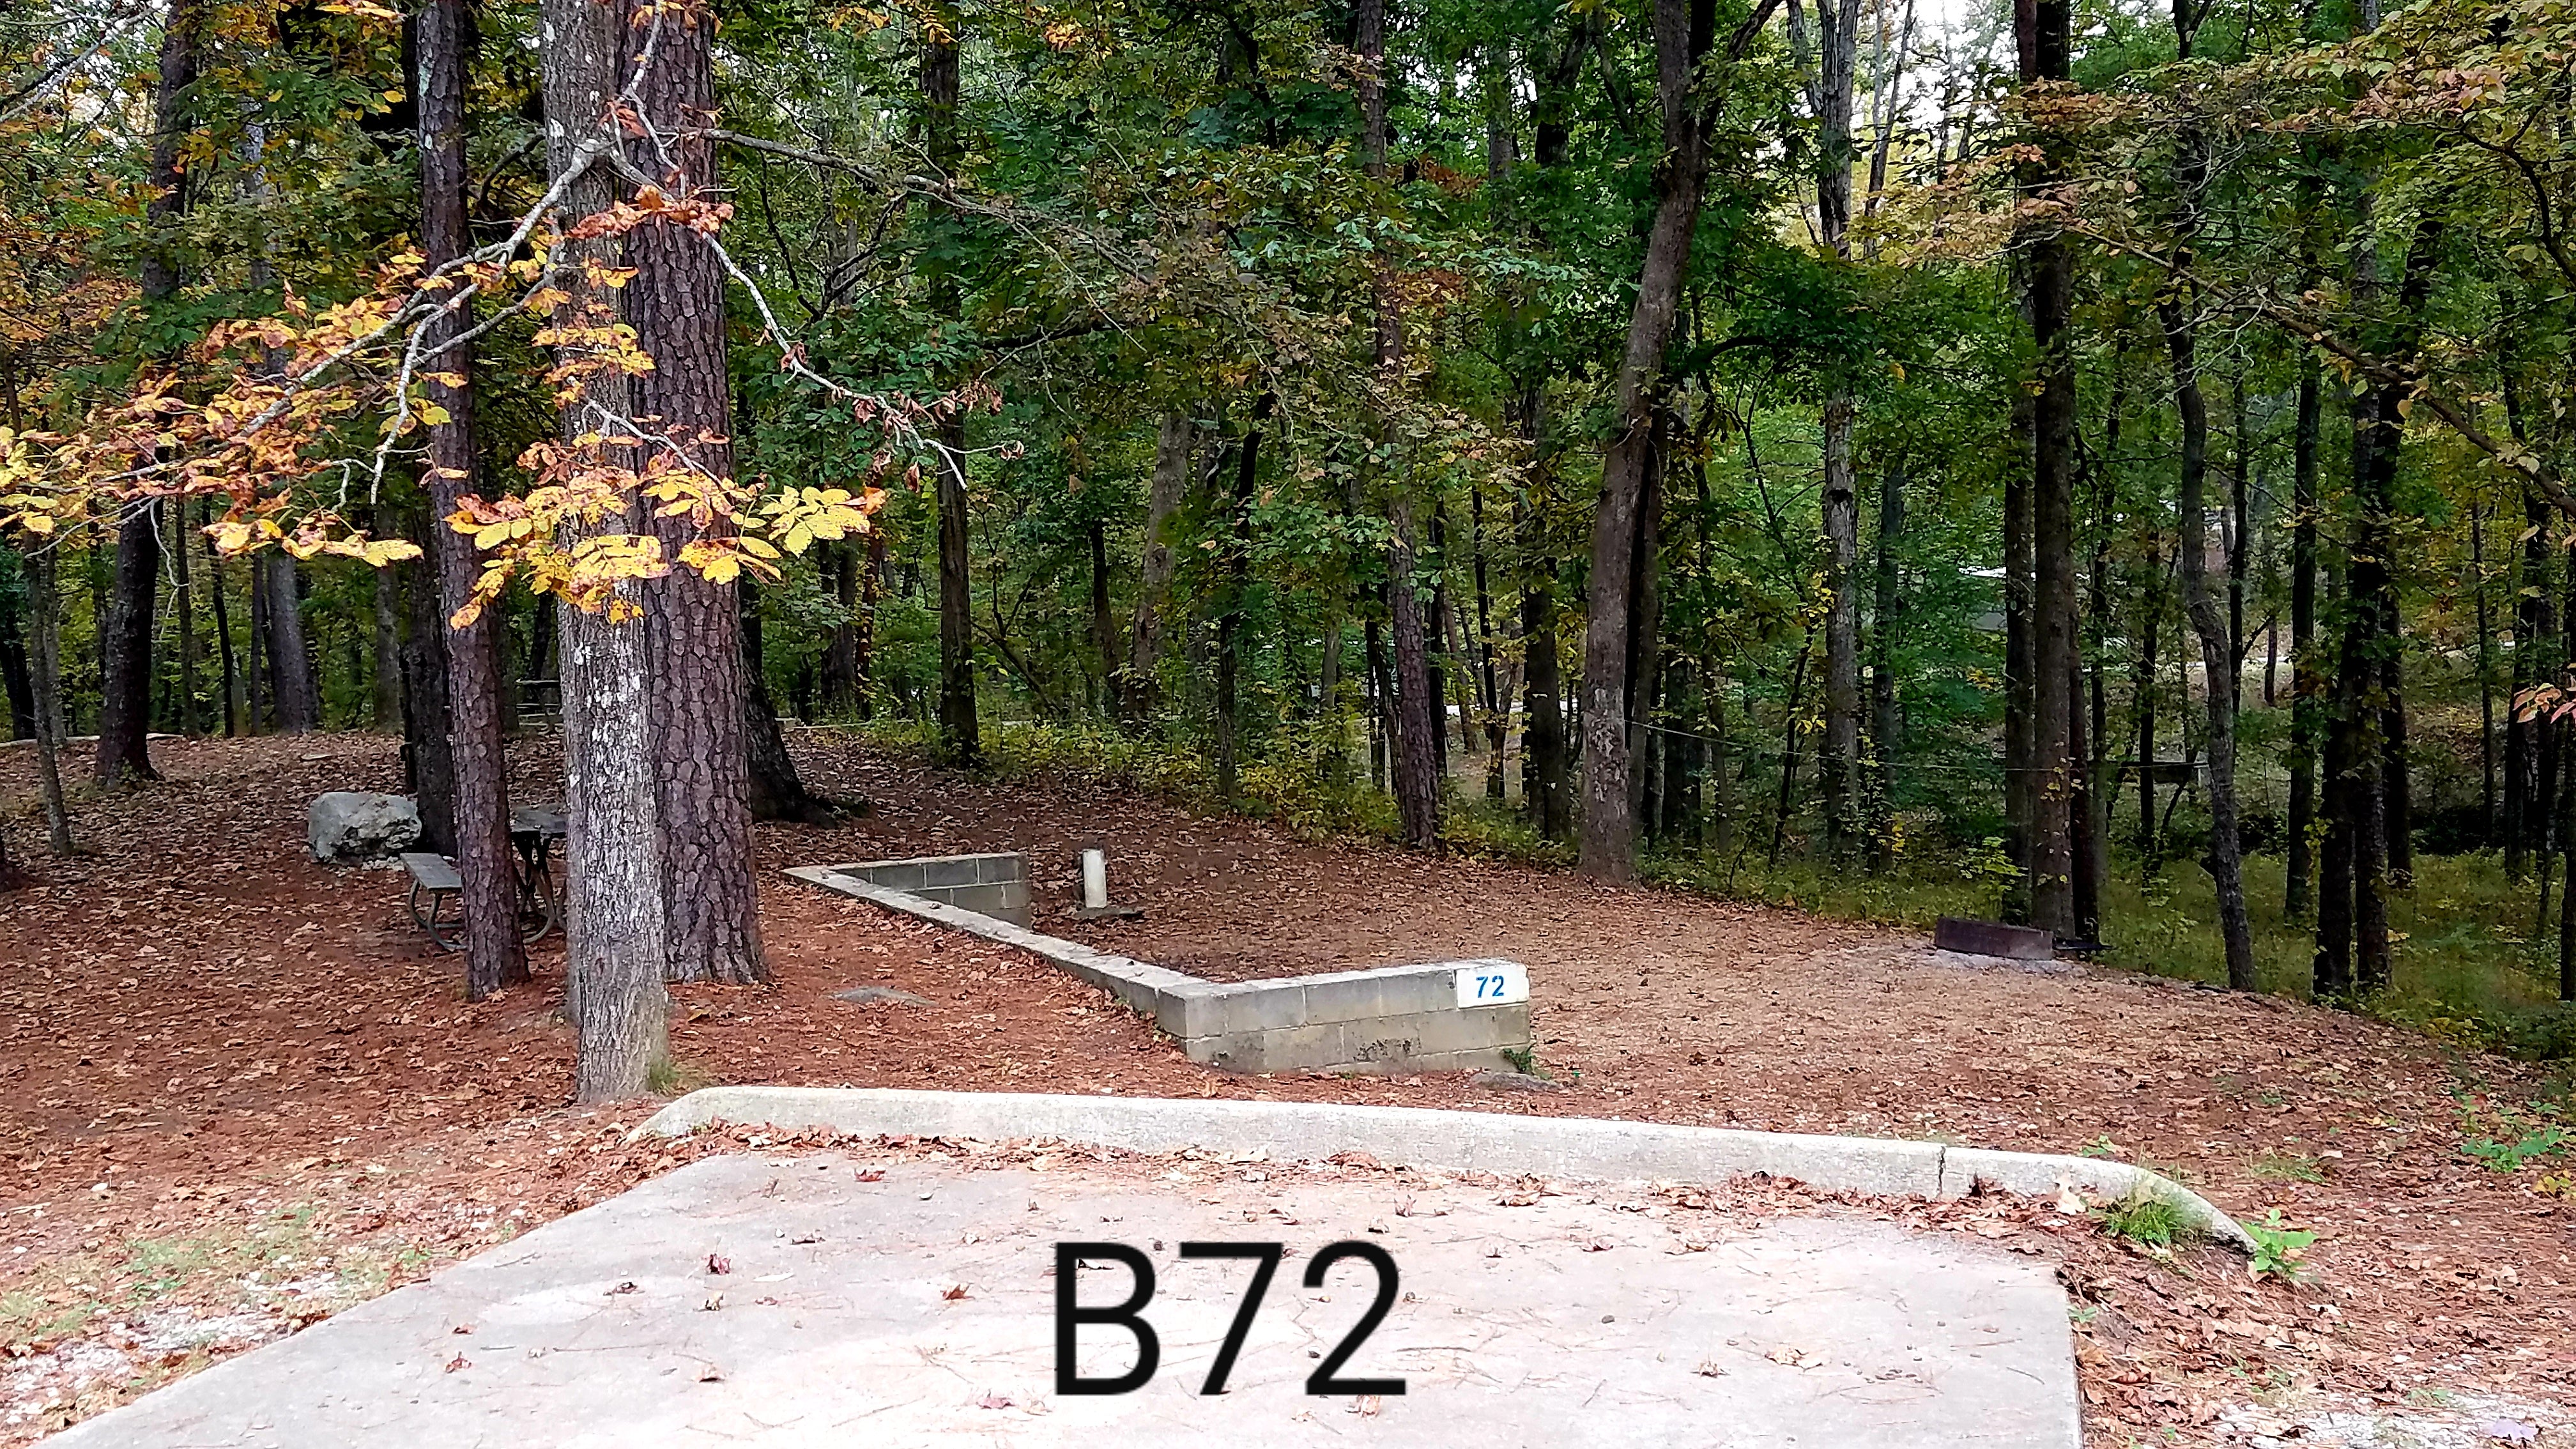 The tent area in the woods is typical of the tent sites.